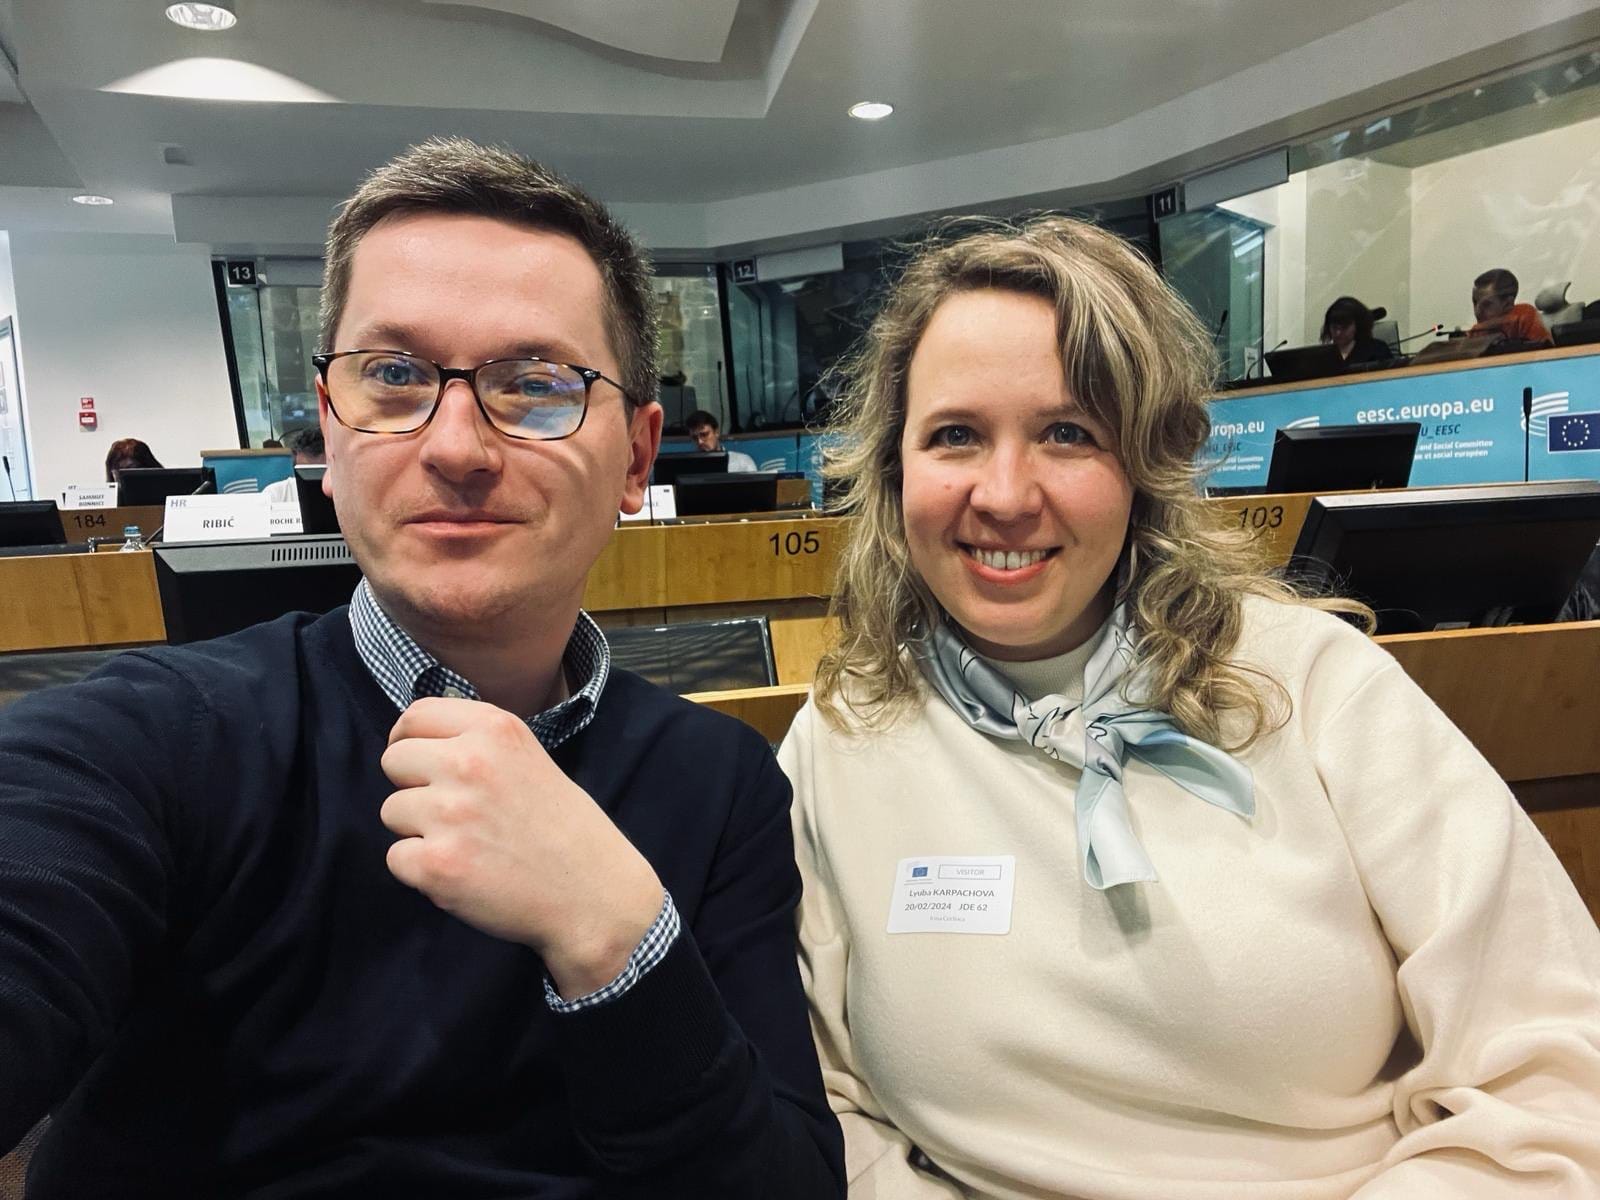 Yesterday, Yehor Pyvovarov, Partnership and Fundraising Lead of Promote Ukraine and Lyuba Karpachova, Refugees Department Lead of Promote Ukraine, took part in a panel discussion of the EESC - European Economic and Social Committee